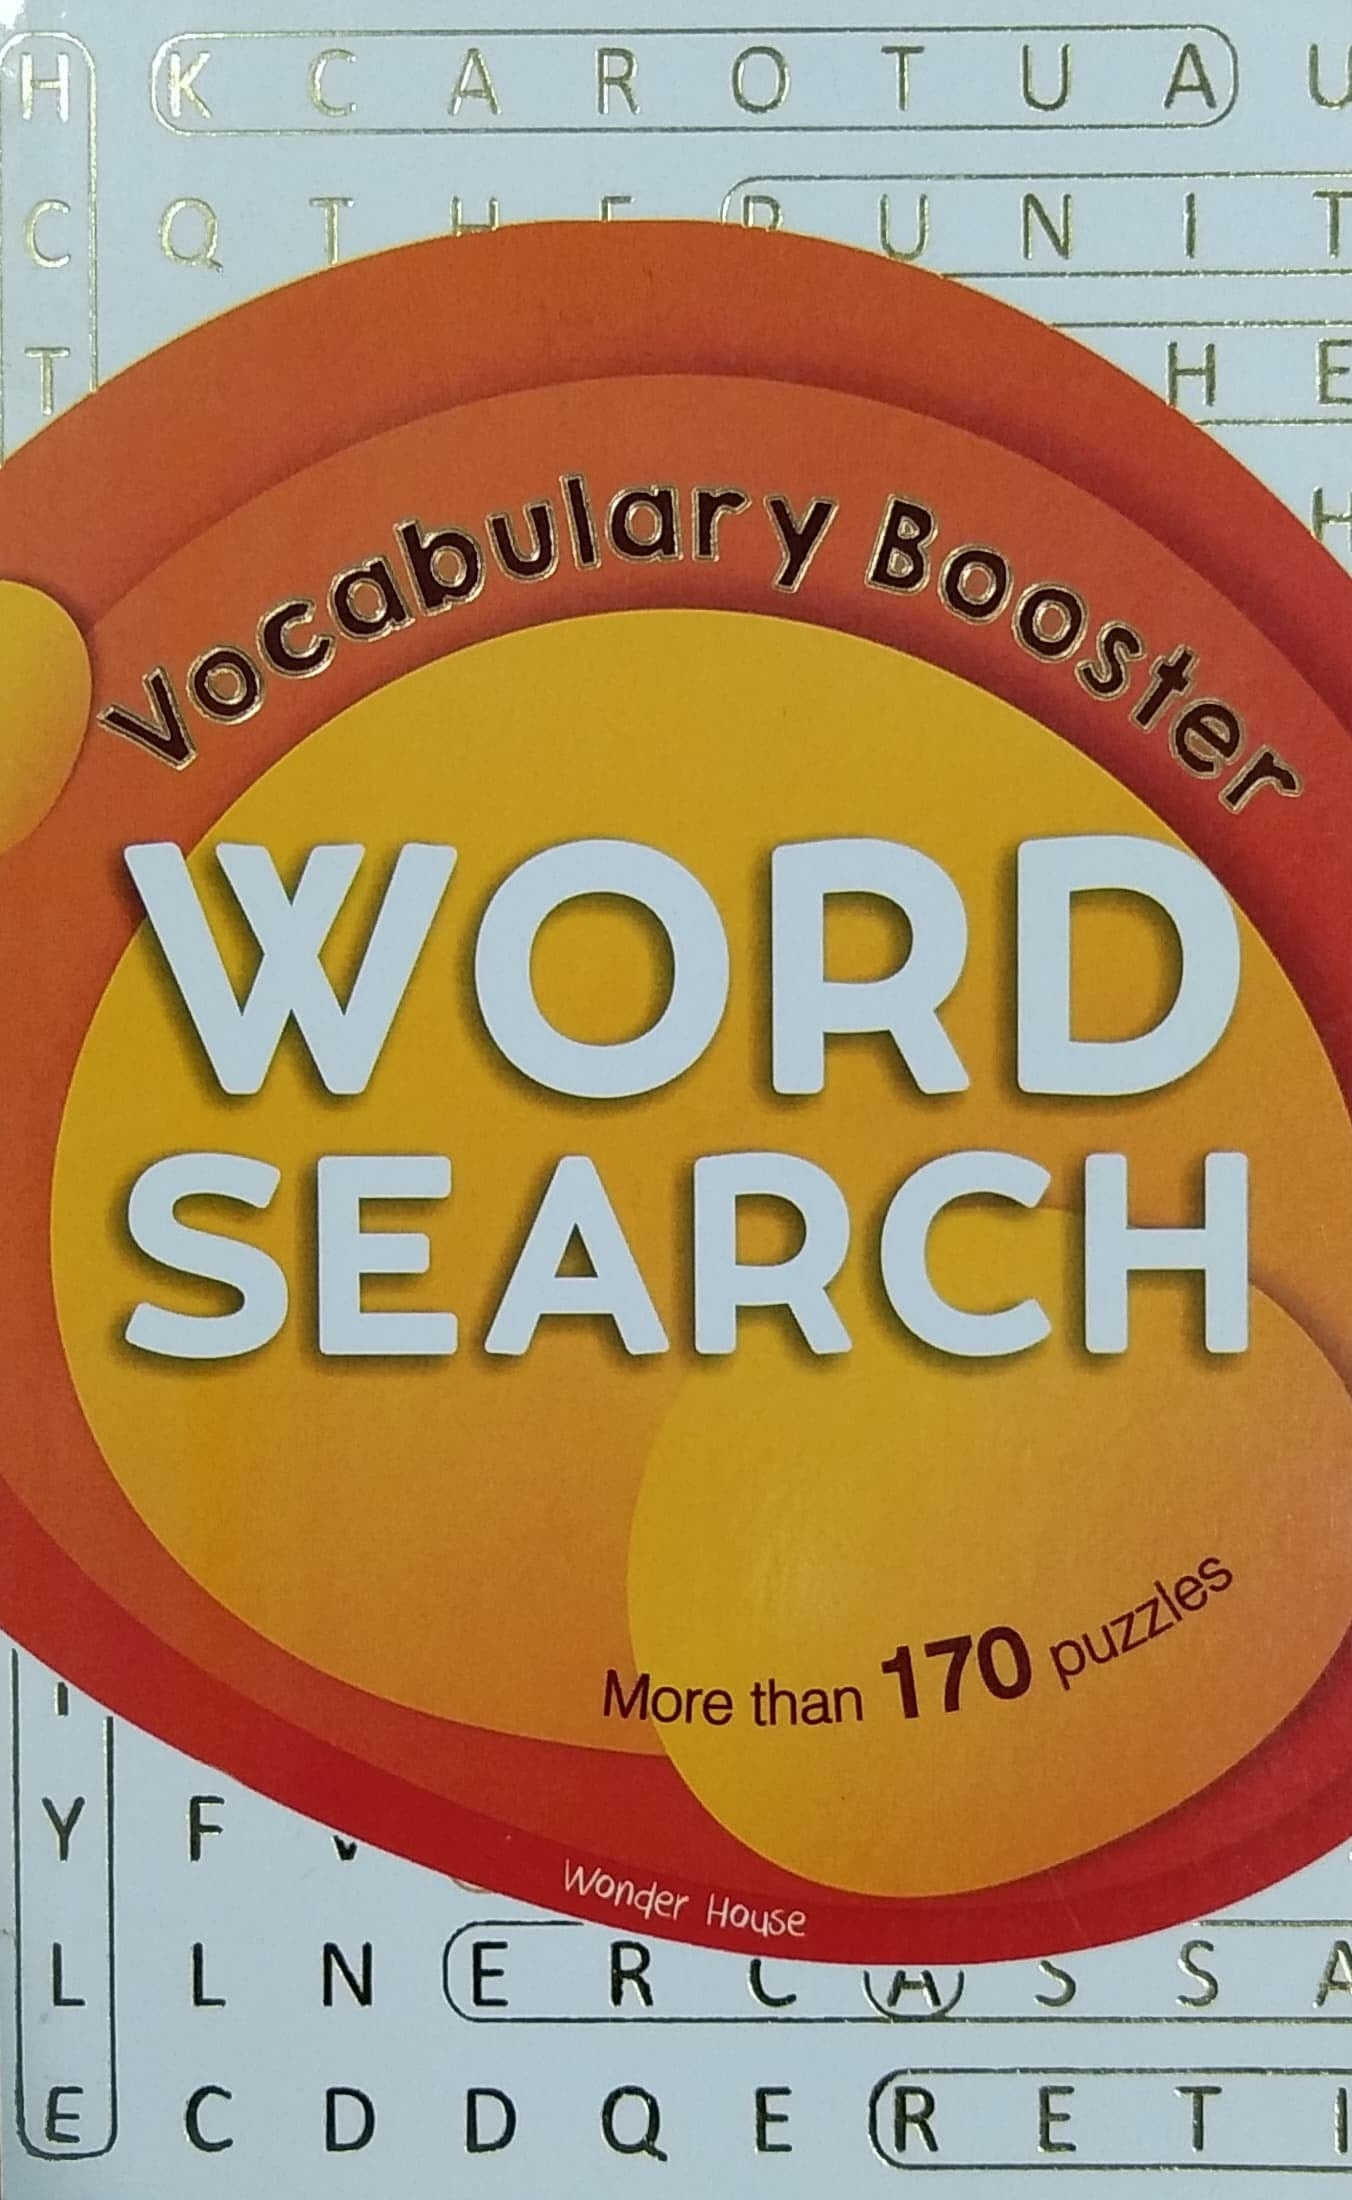 WORD SEARCH - Vocabulary Booster